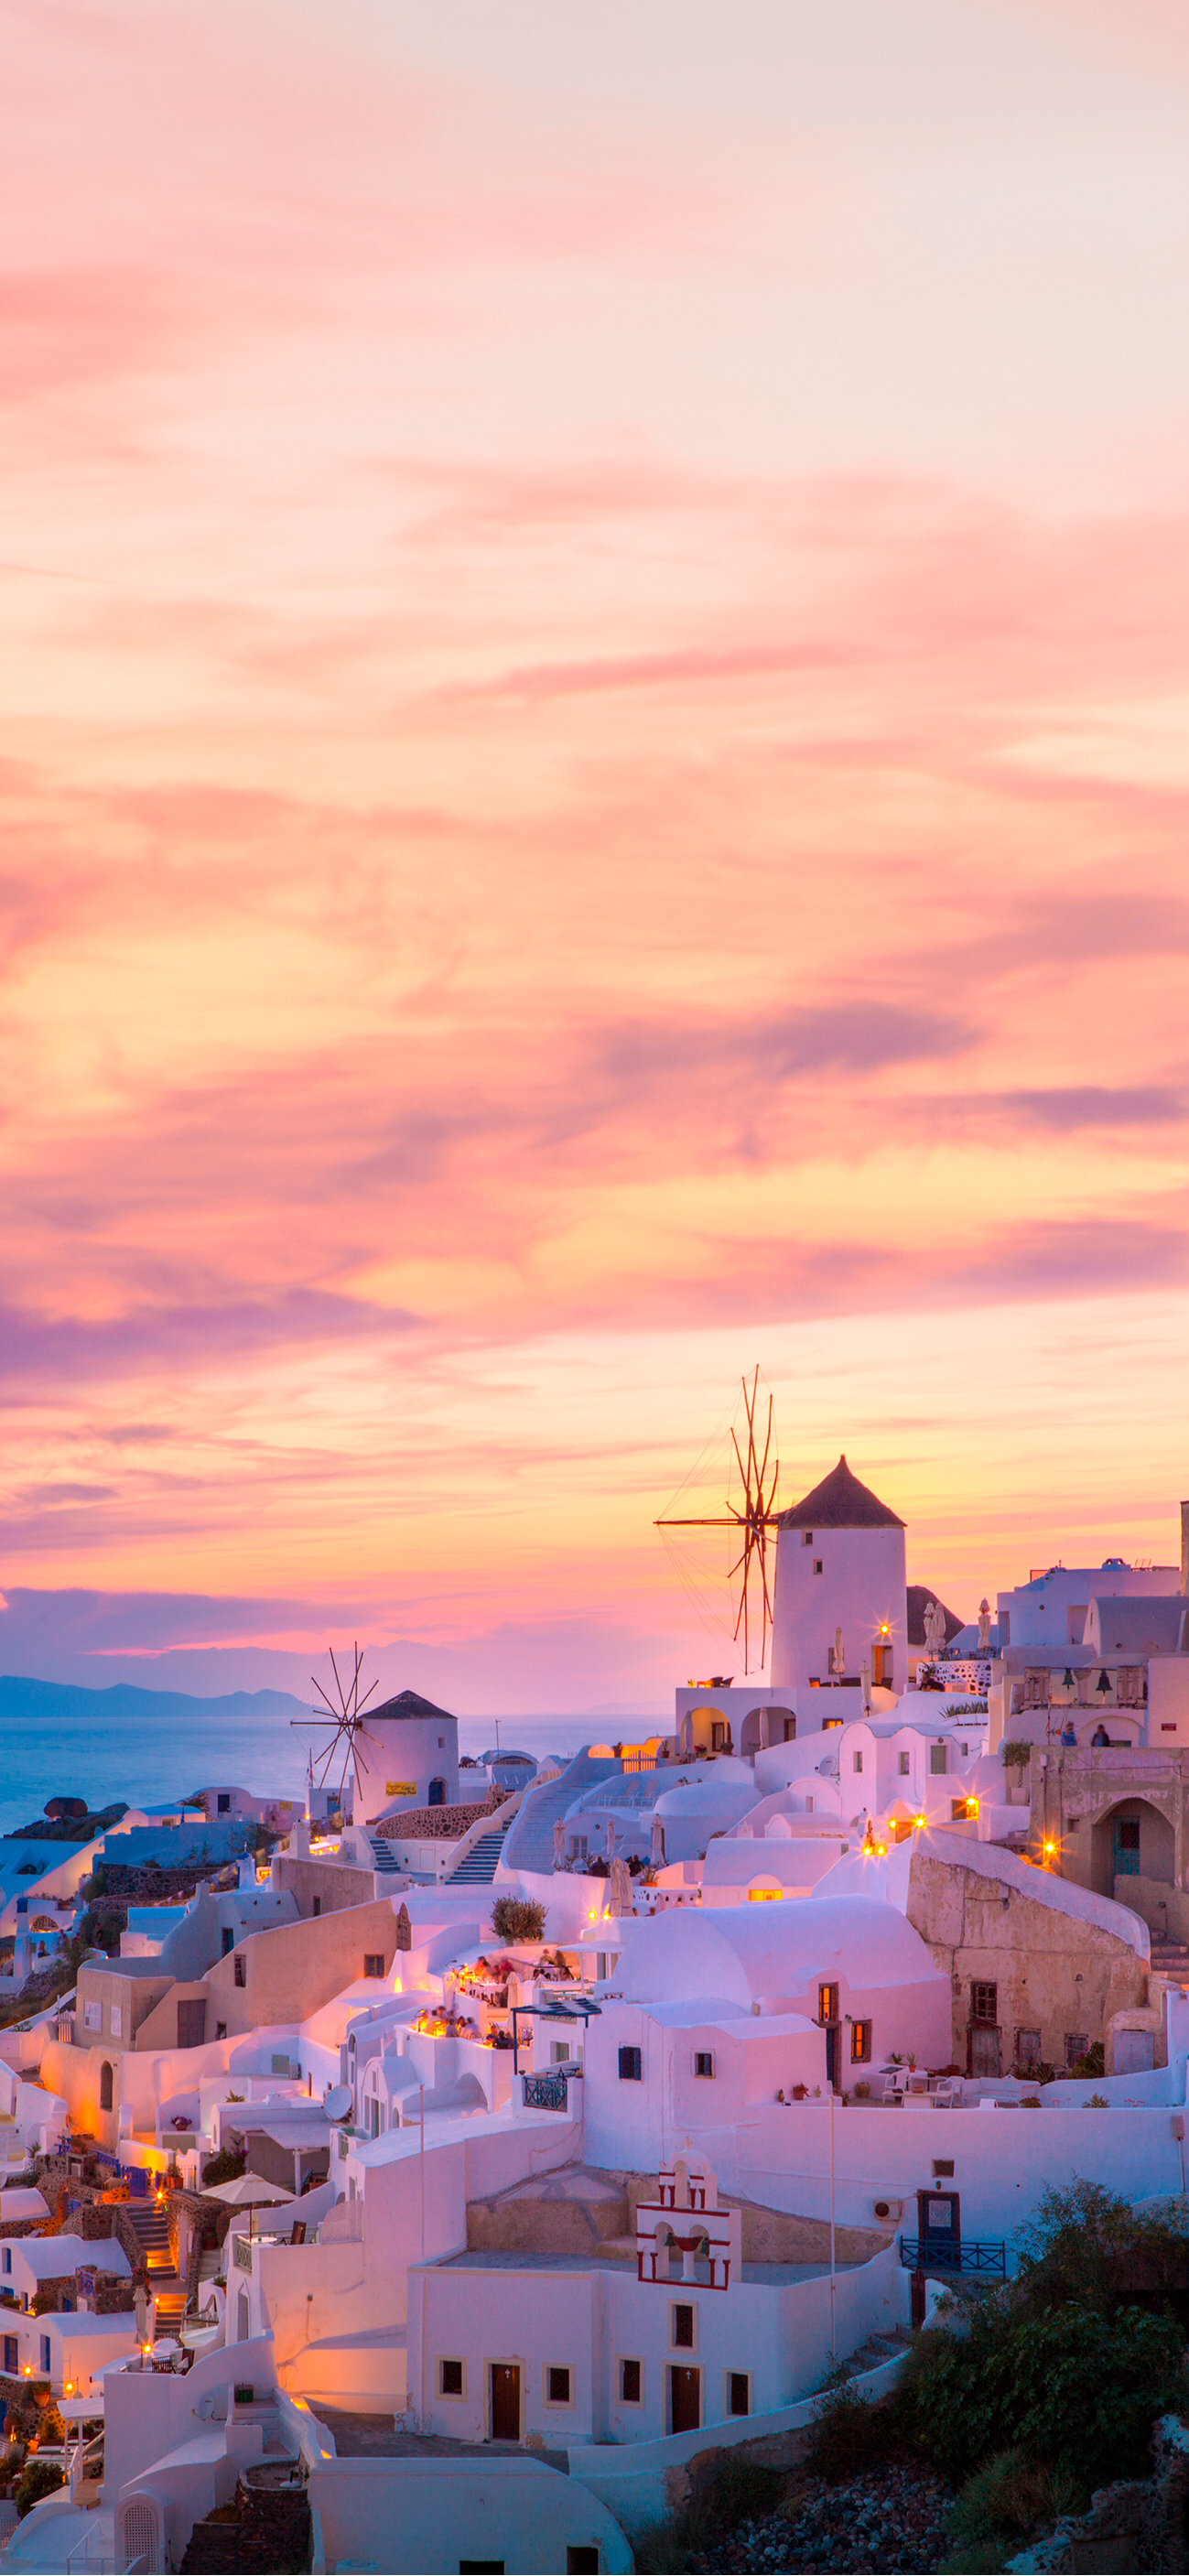 Wallpaper. Greece wallpaper, Beautiful places to travel, Sky aesthetic